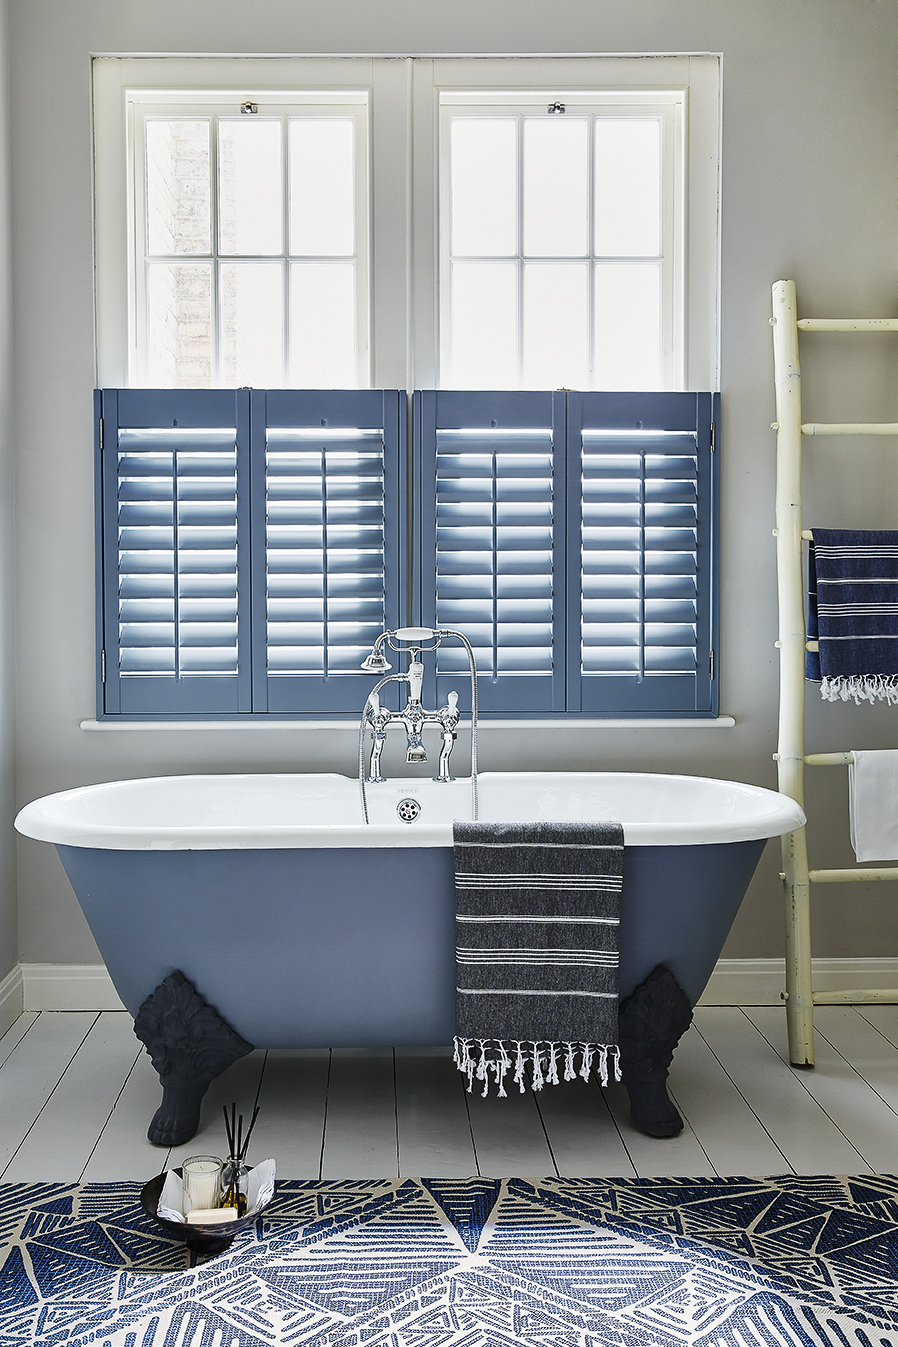 Bathroom shutters in blue with a blue free standing bathtub and modern decor.